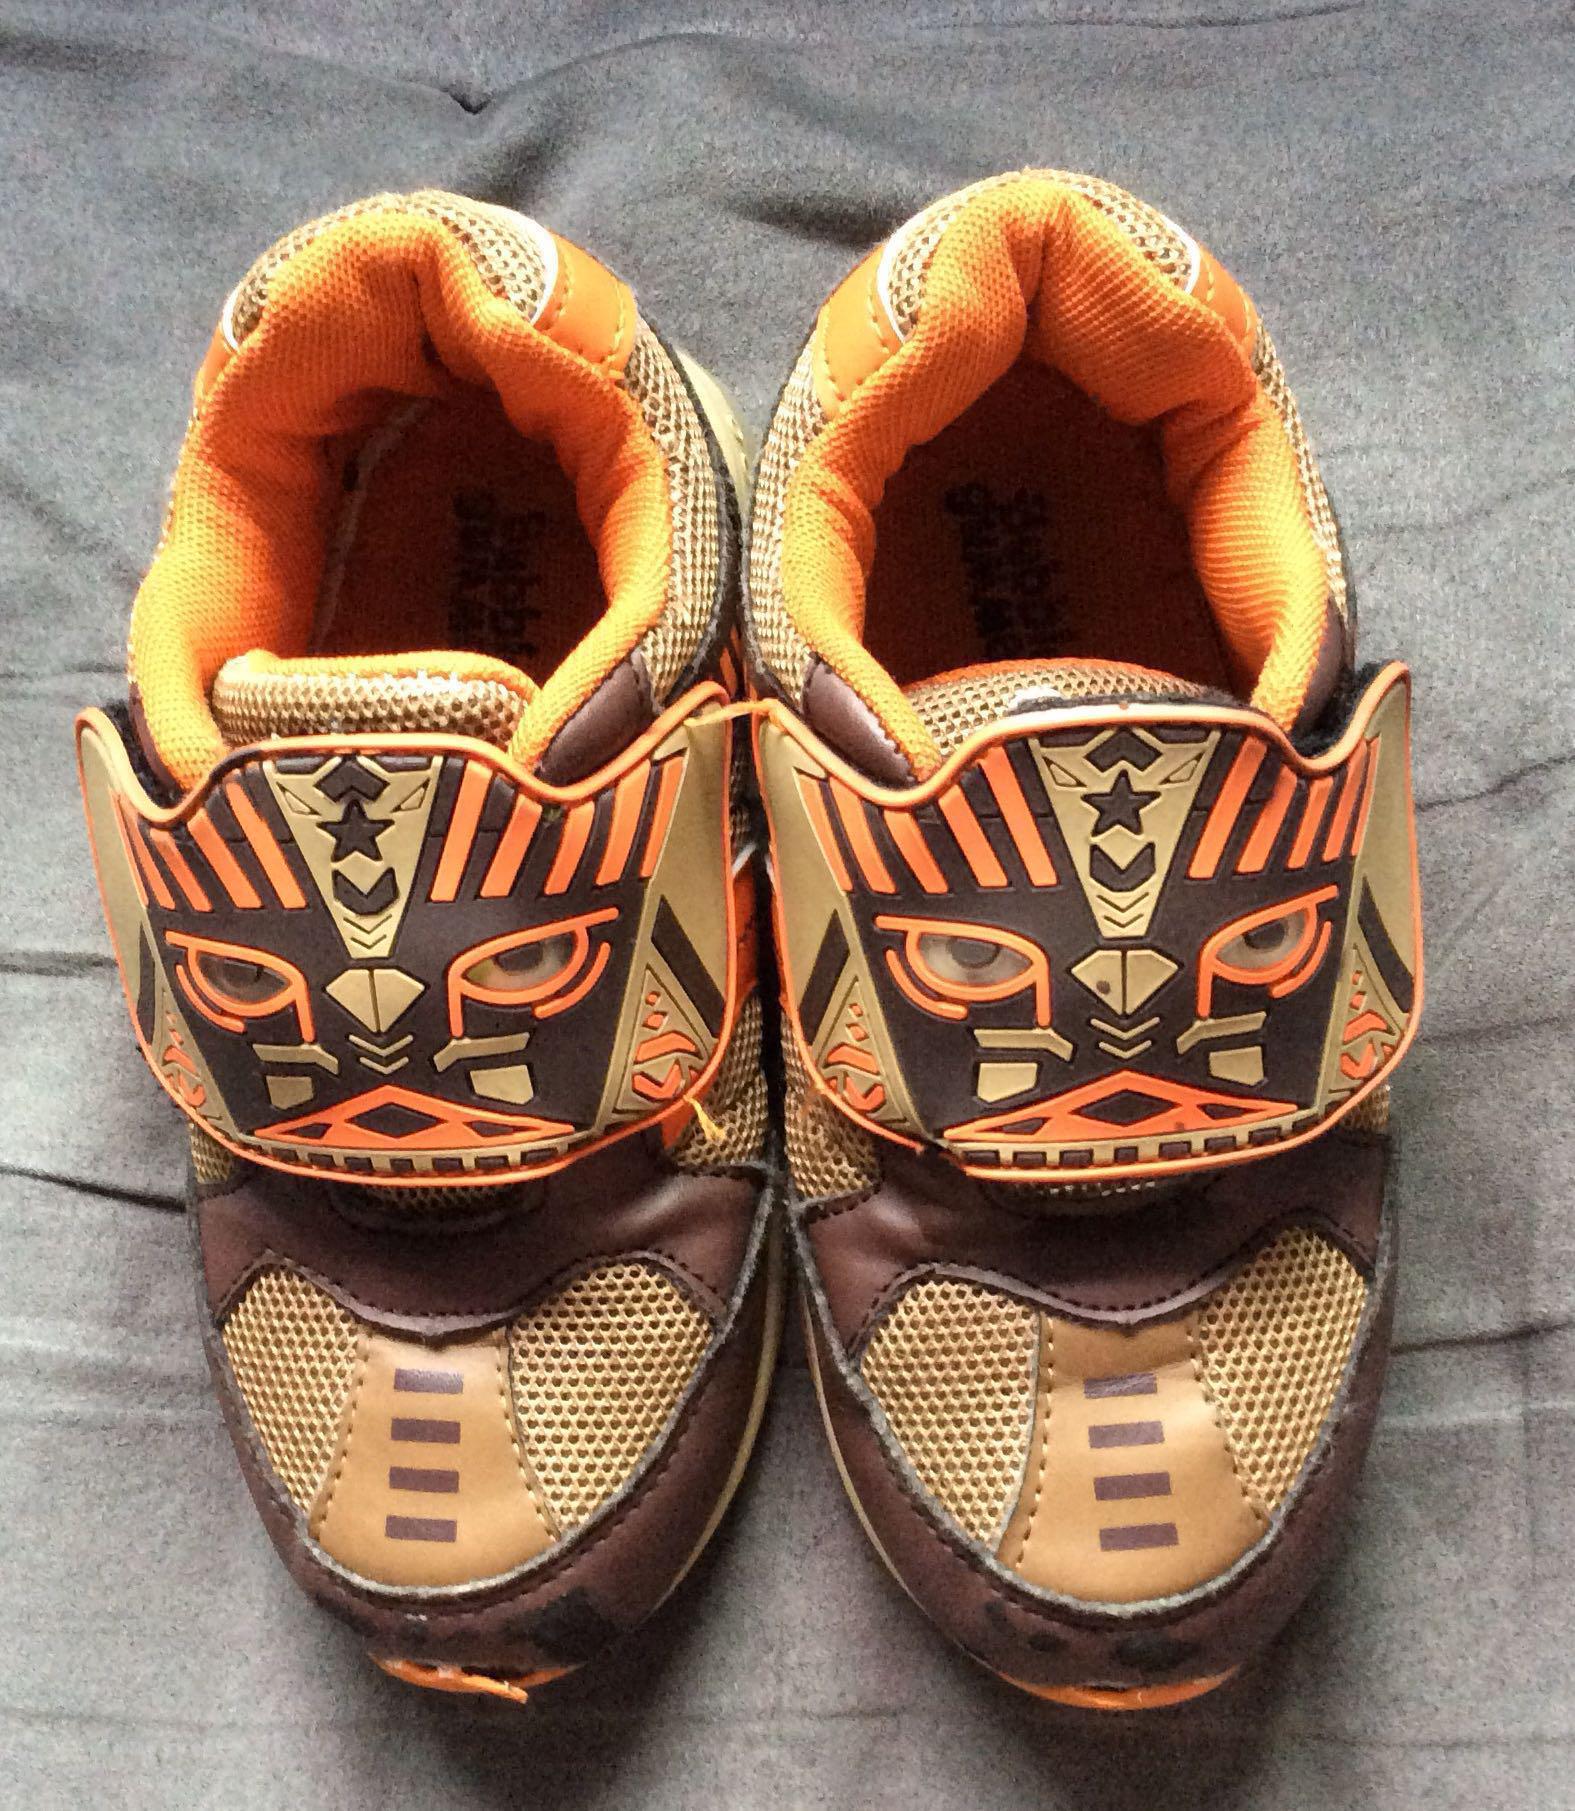 transformers kids shoes